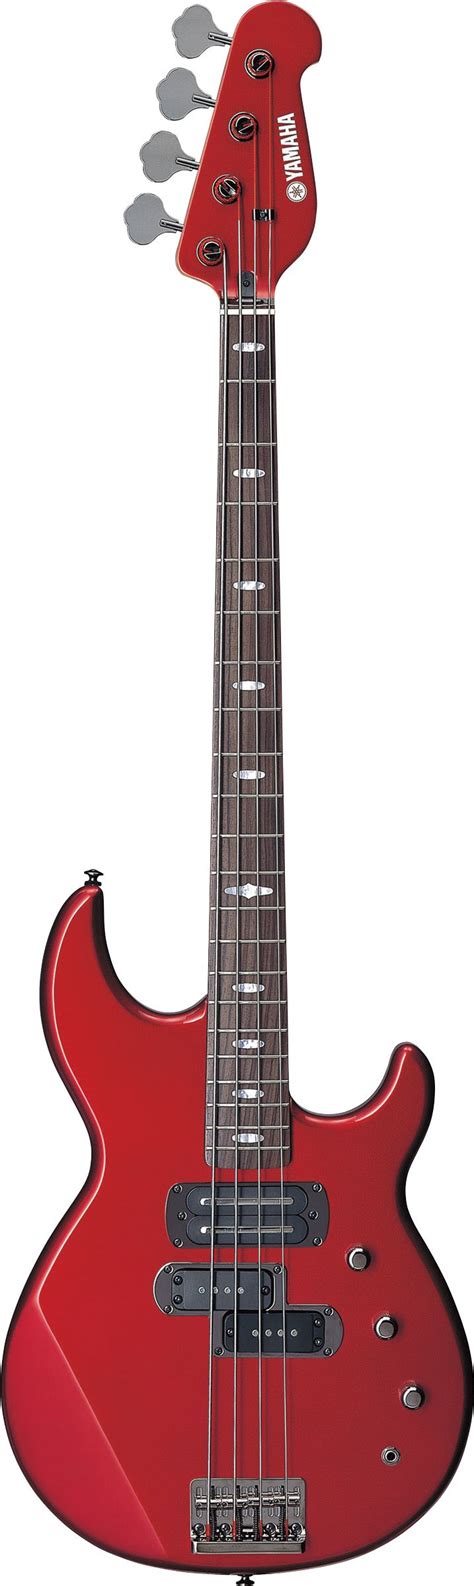 Bb714bs Specs Basses Guitars Basses And Amps Musical Instruments